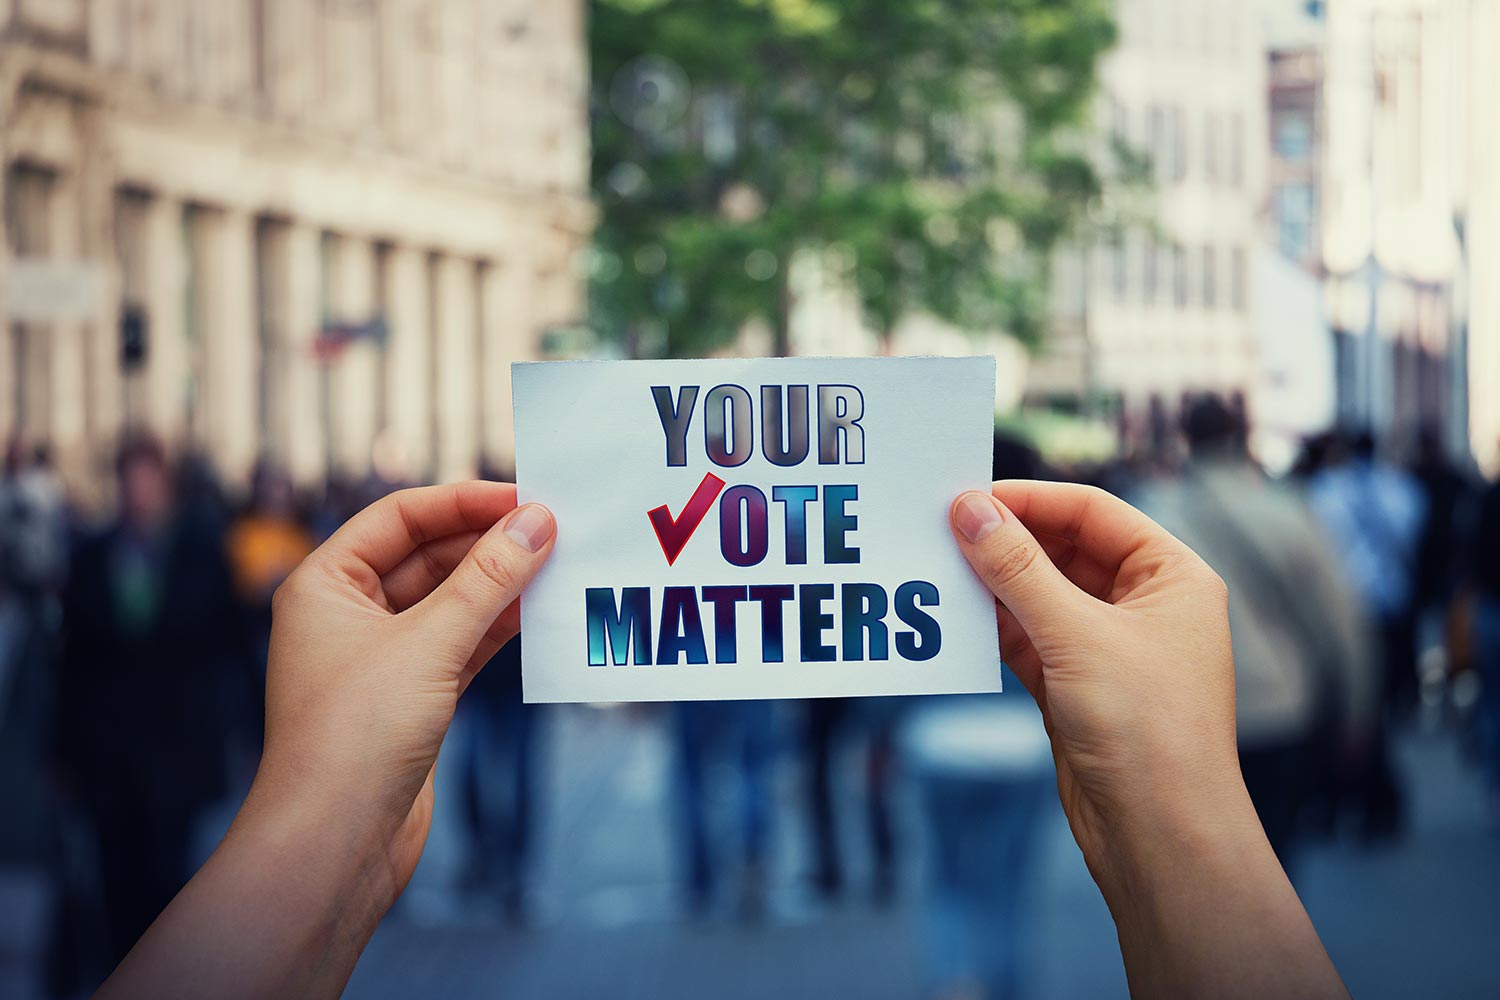 Election Year Messages Nonprofits Can Use